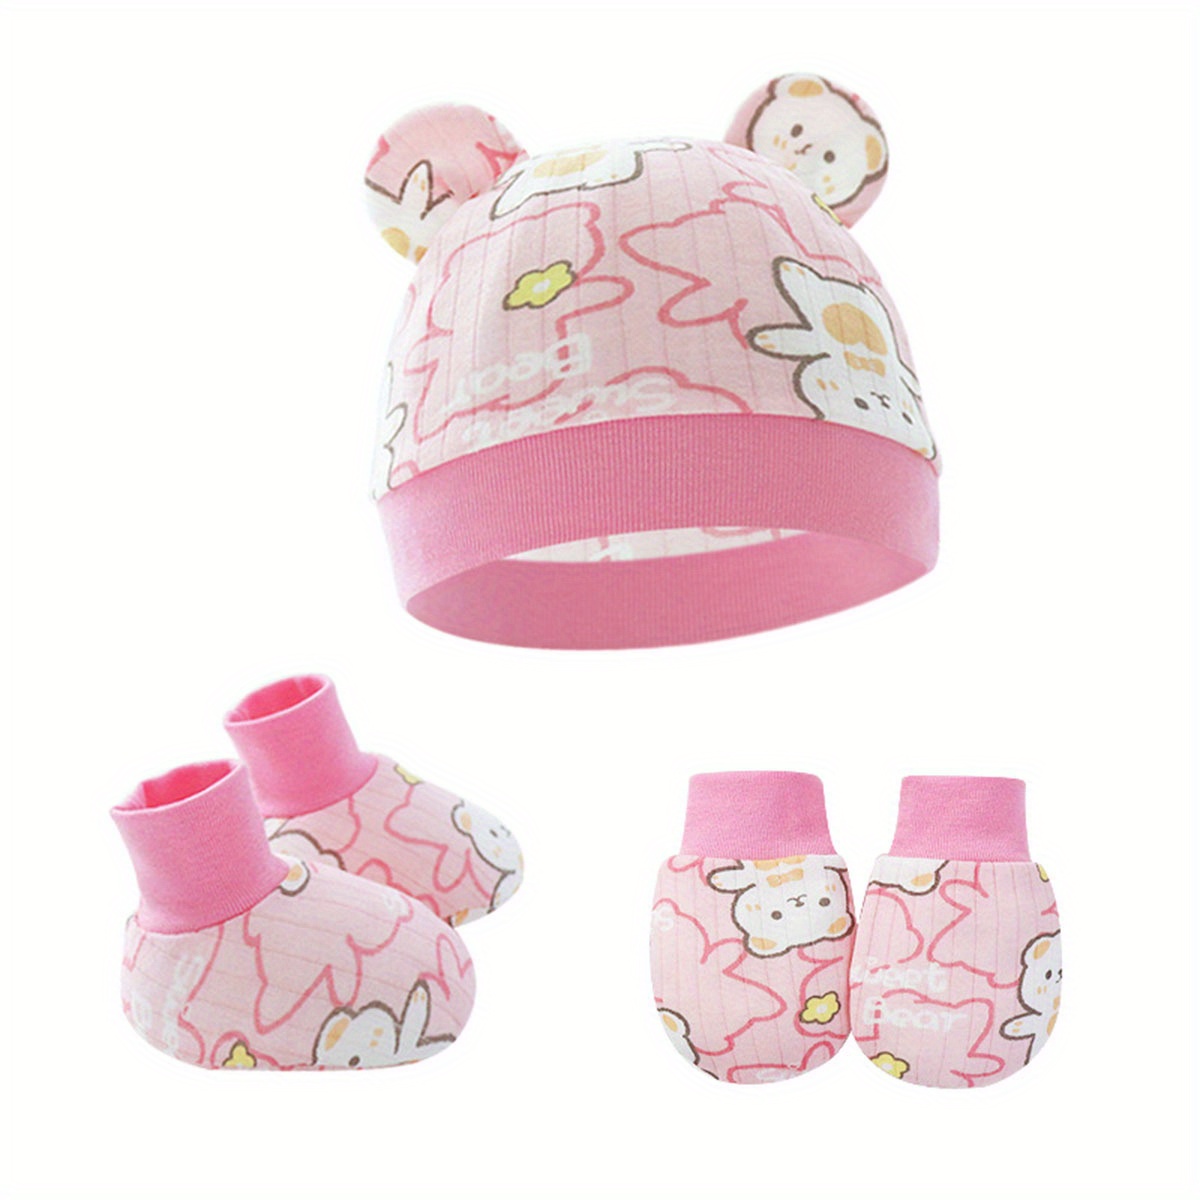 3pcs baby girls cute cartoon breathable soft hat socks gloves set hair accessories for gift details 1